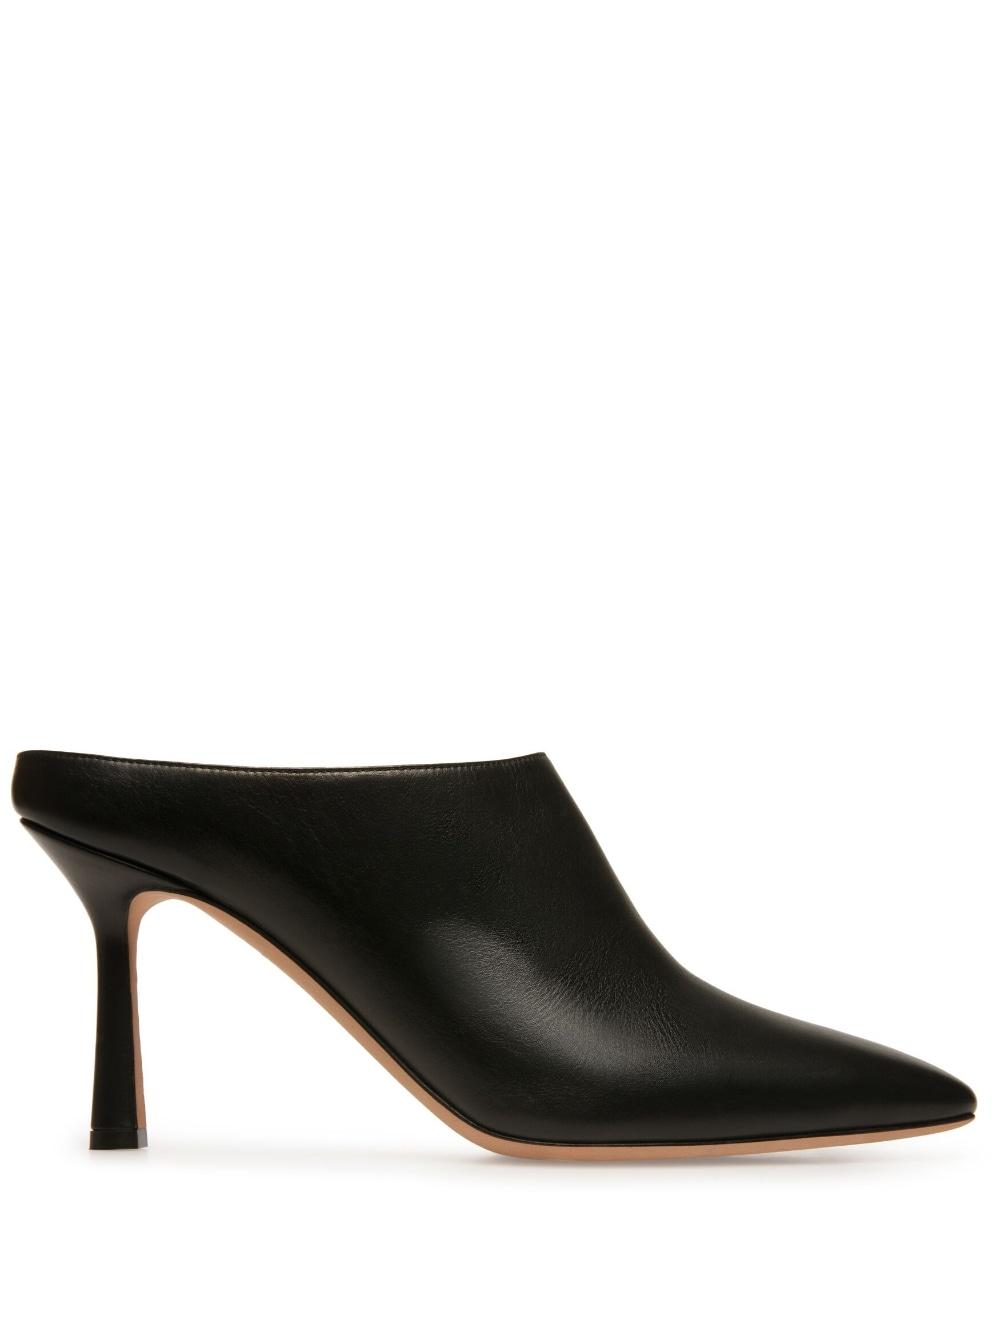 Bally Nadine 85mm Leather Pumps in Black | Lyst